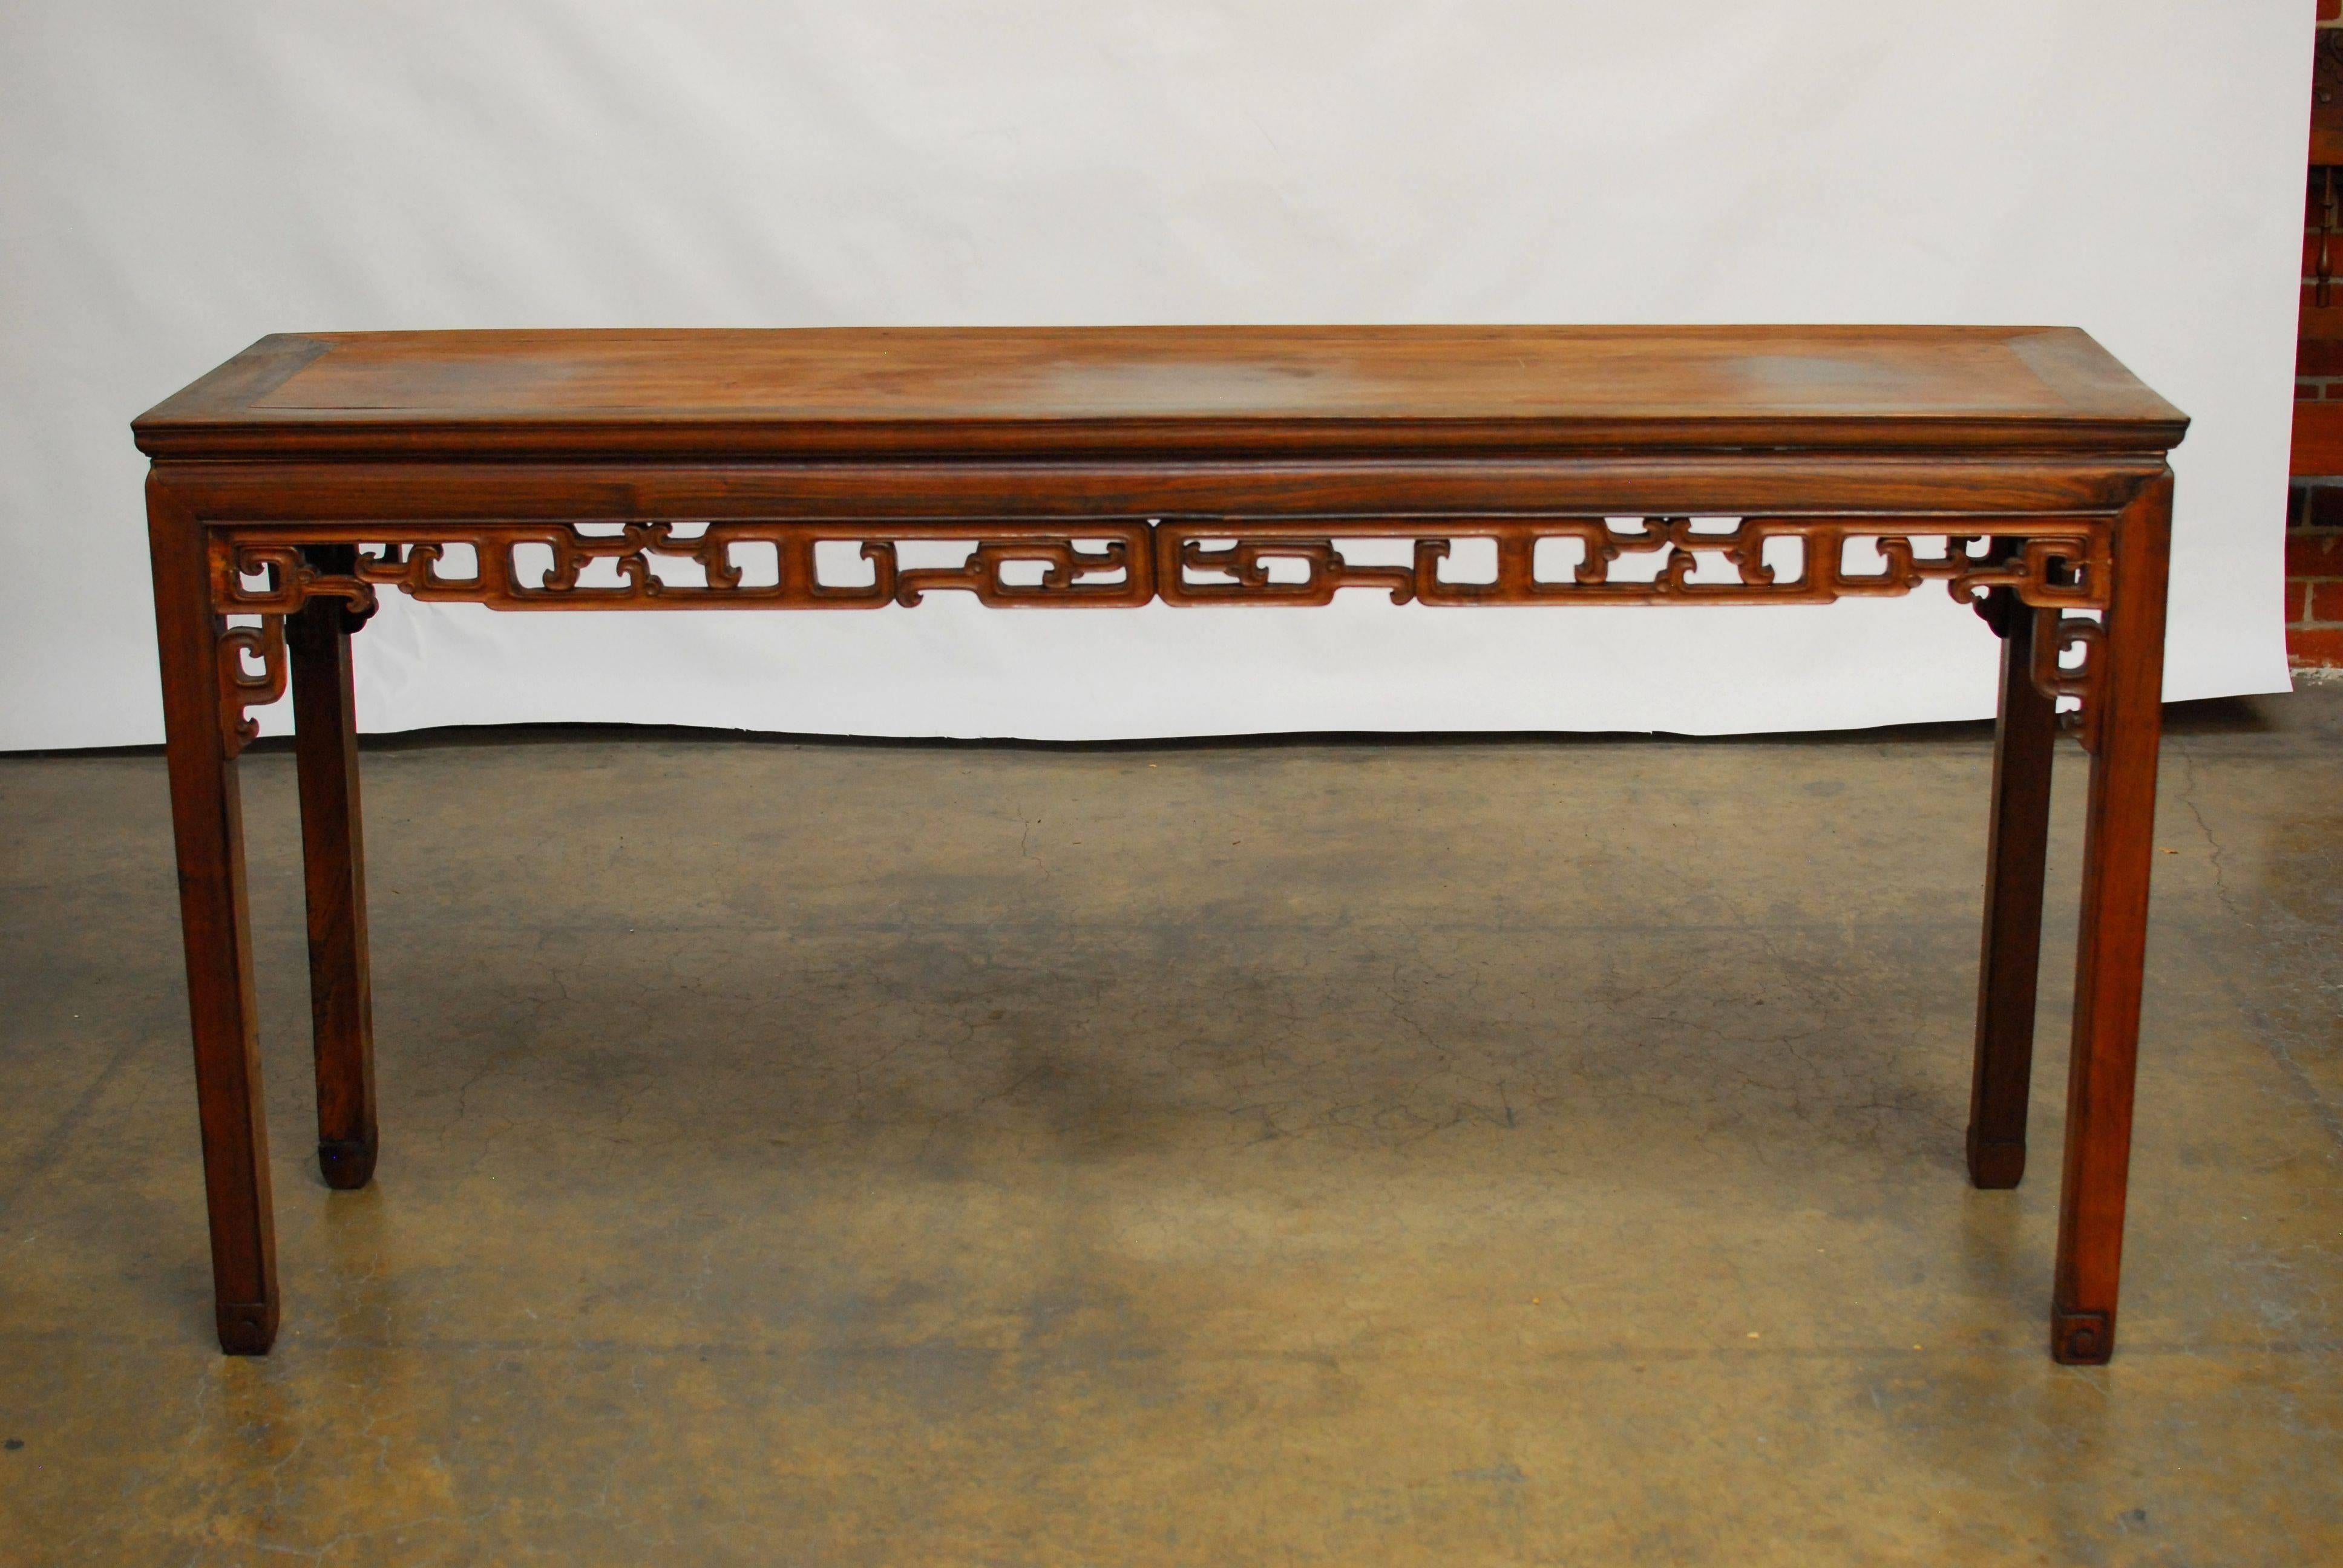 19th century Chinese rosewood altar table with pierced and carved frieze on square legs and scroll feet. Also known as a scroll table, or long console for viewing scrolls. From Qing dynasty era. From a collector’s estate in San Francisco CA.